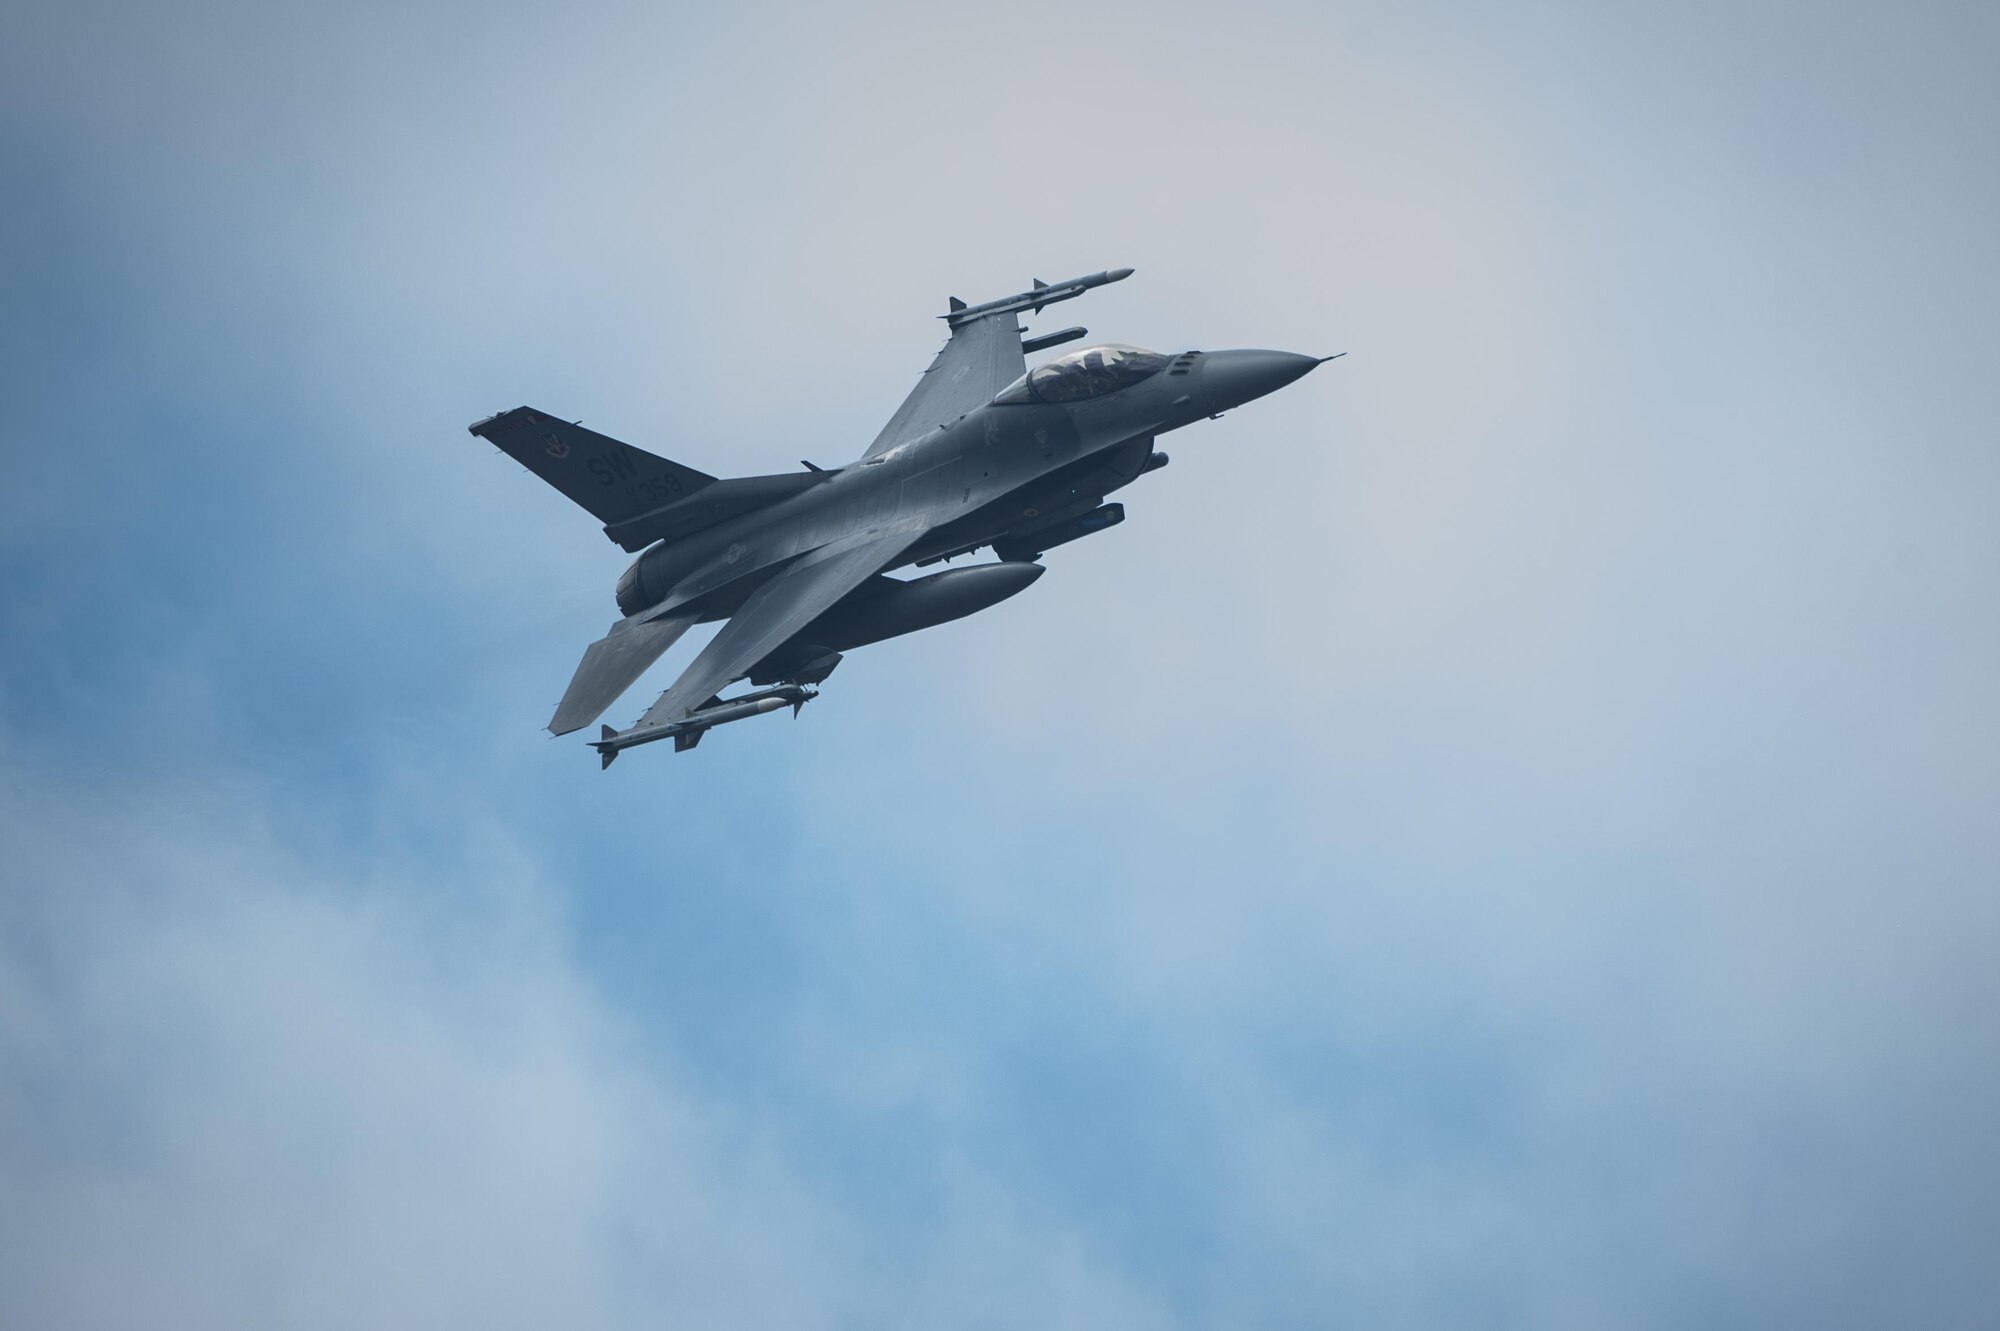 An F-16 Fighting Falcon soars through the sky during a training exercise, Feb. 18, 2016, at Moody Air Force Base, Ga. During the training, the aircraft conducted tactical air and ground maneuvers, as well as weapons training. (U.S. Air Force photo by Airman 1st Class Lauren M. Johnson/Released)